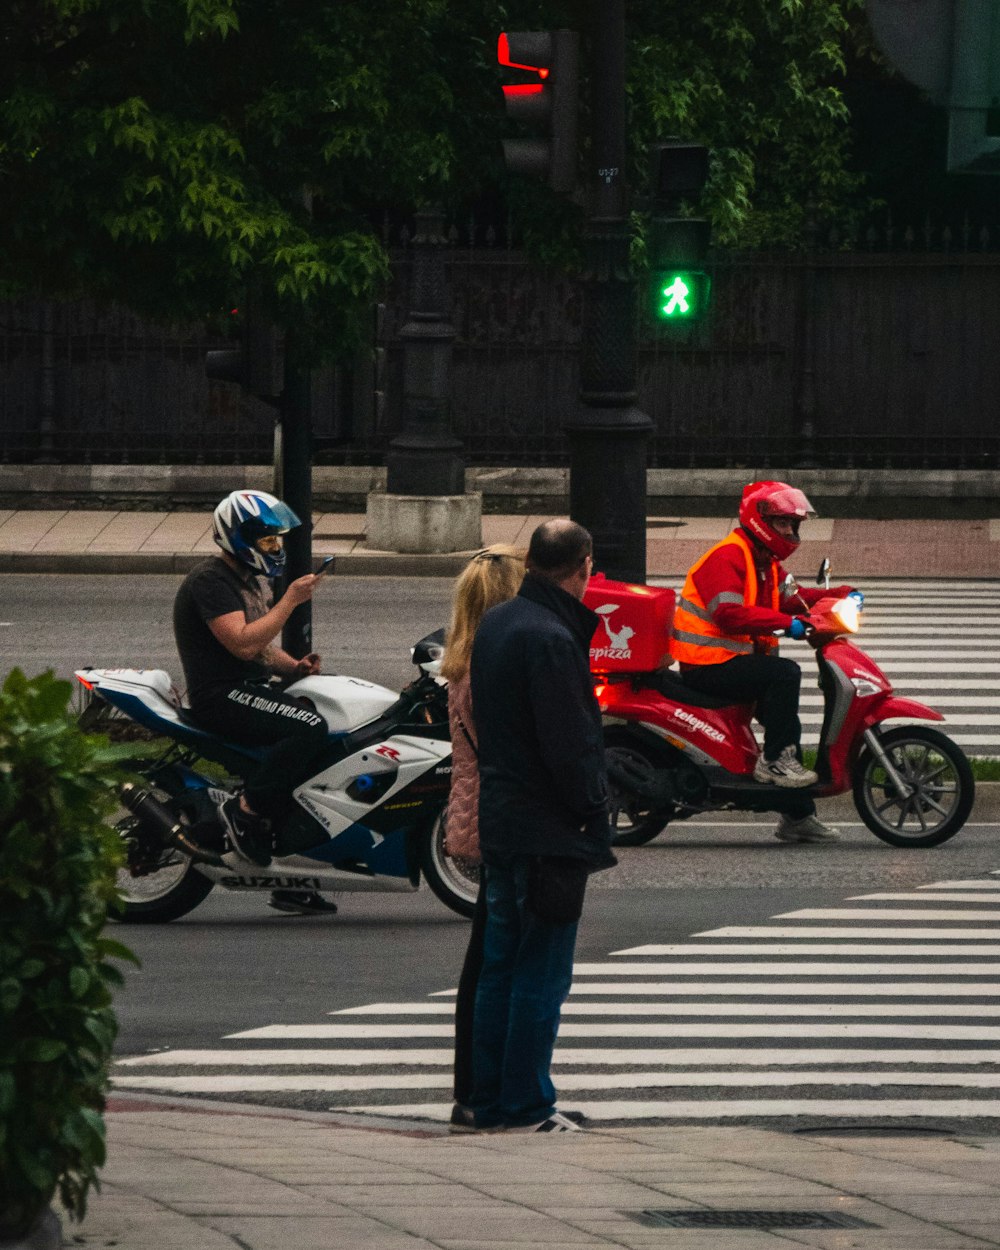 people riding on motorcycle on road during daytime